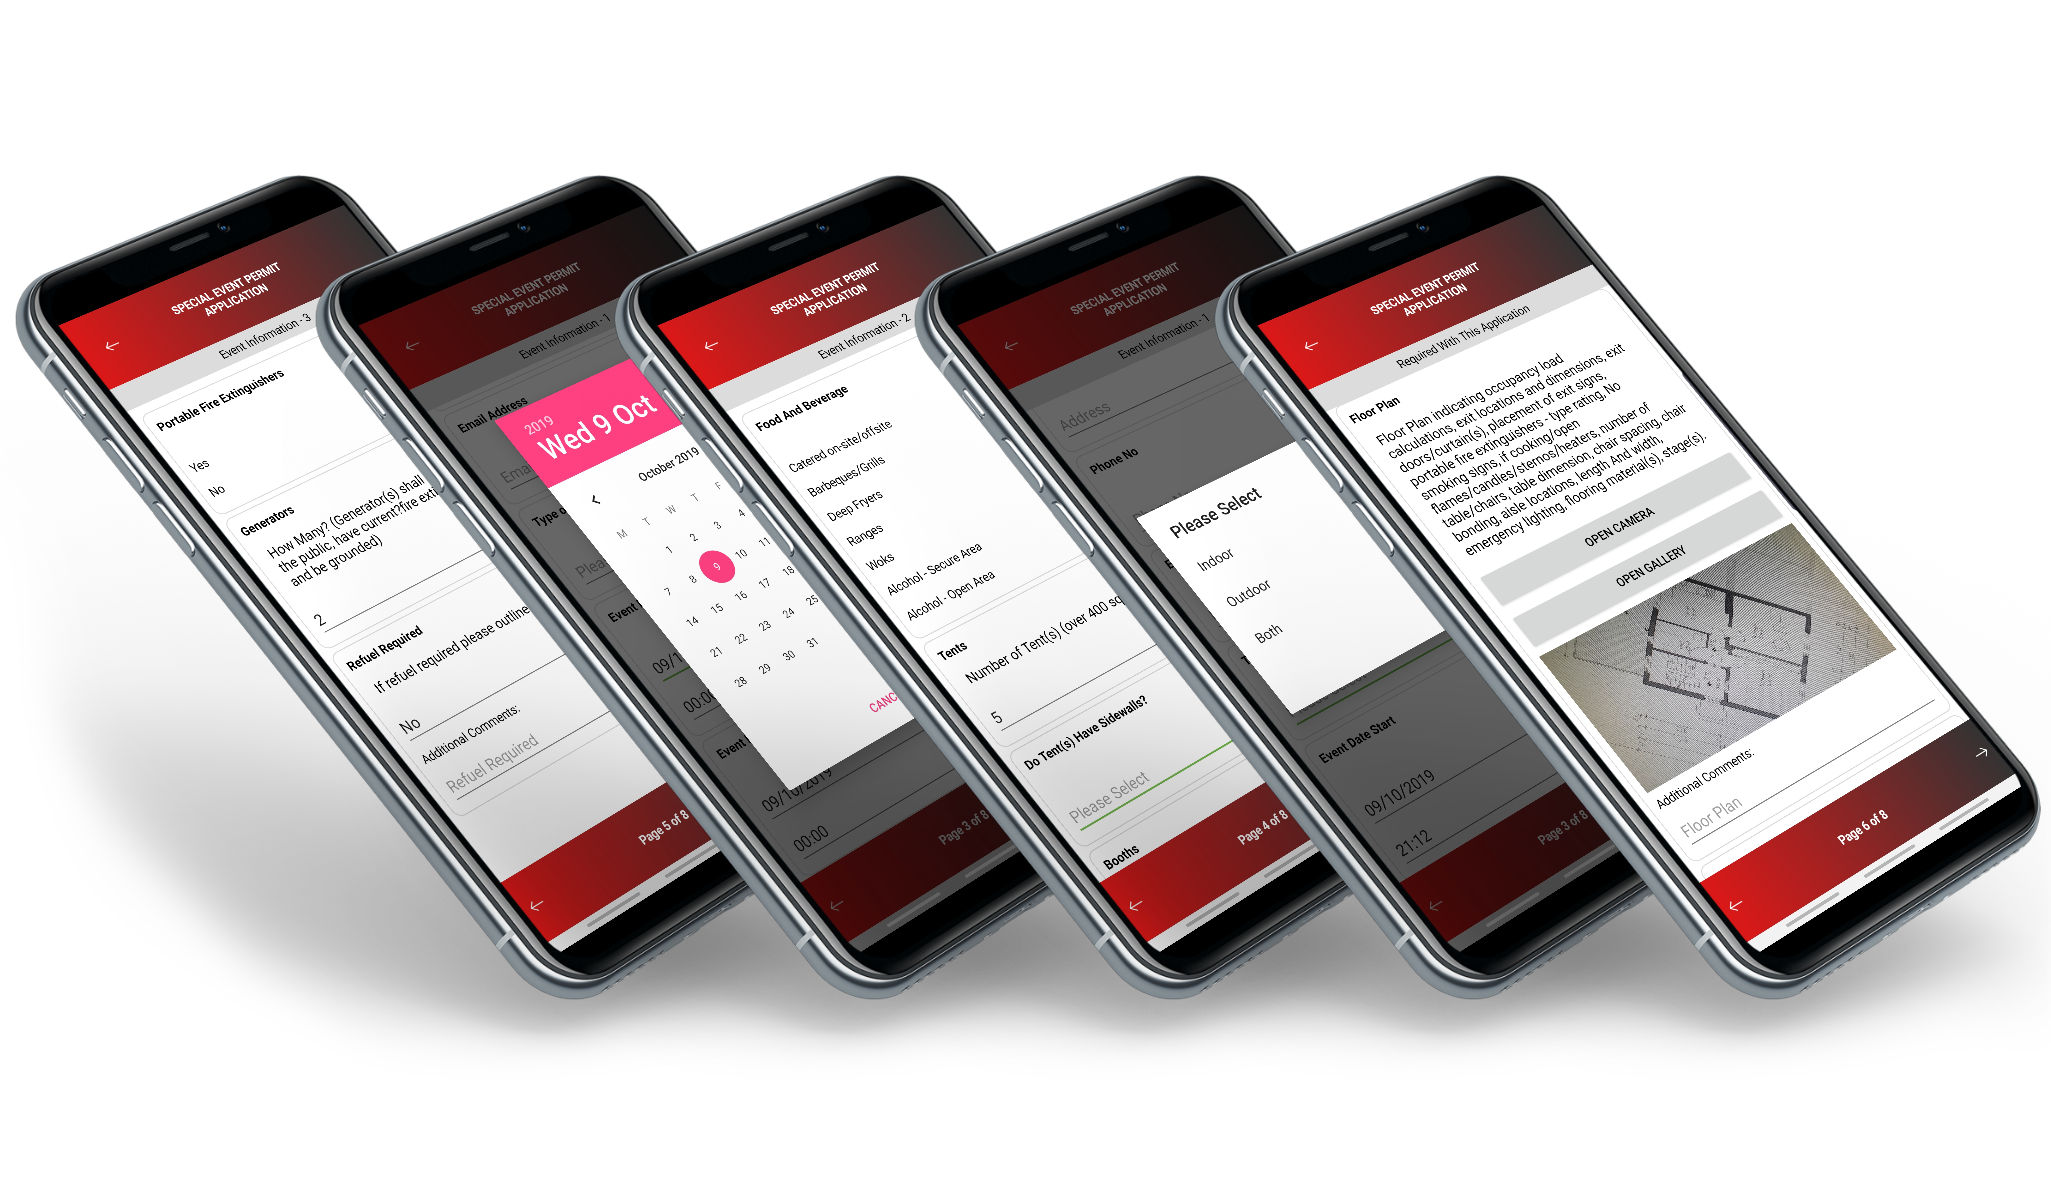 Examples of Incident Command Forms on the PlatForms Mobile app. Operational Assurance & Incident Command displayed on mobile devices